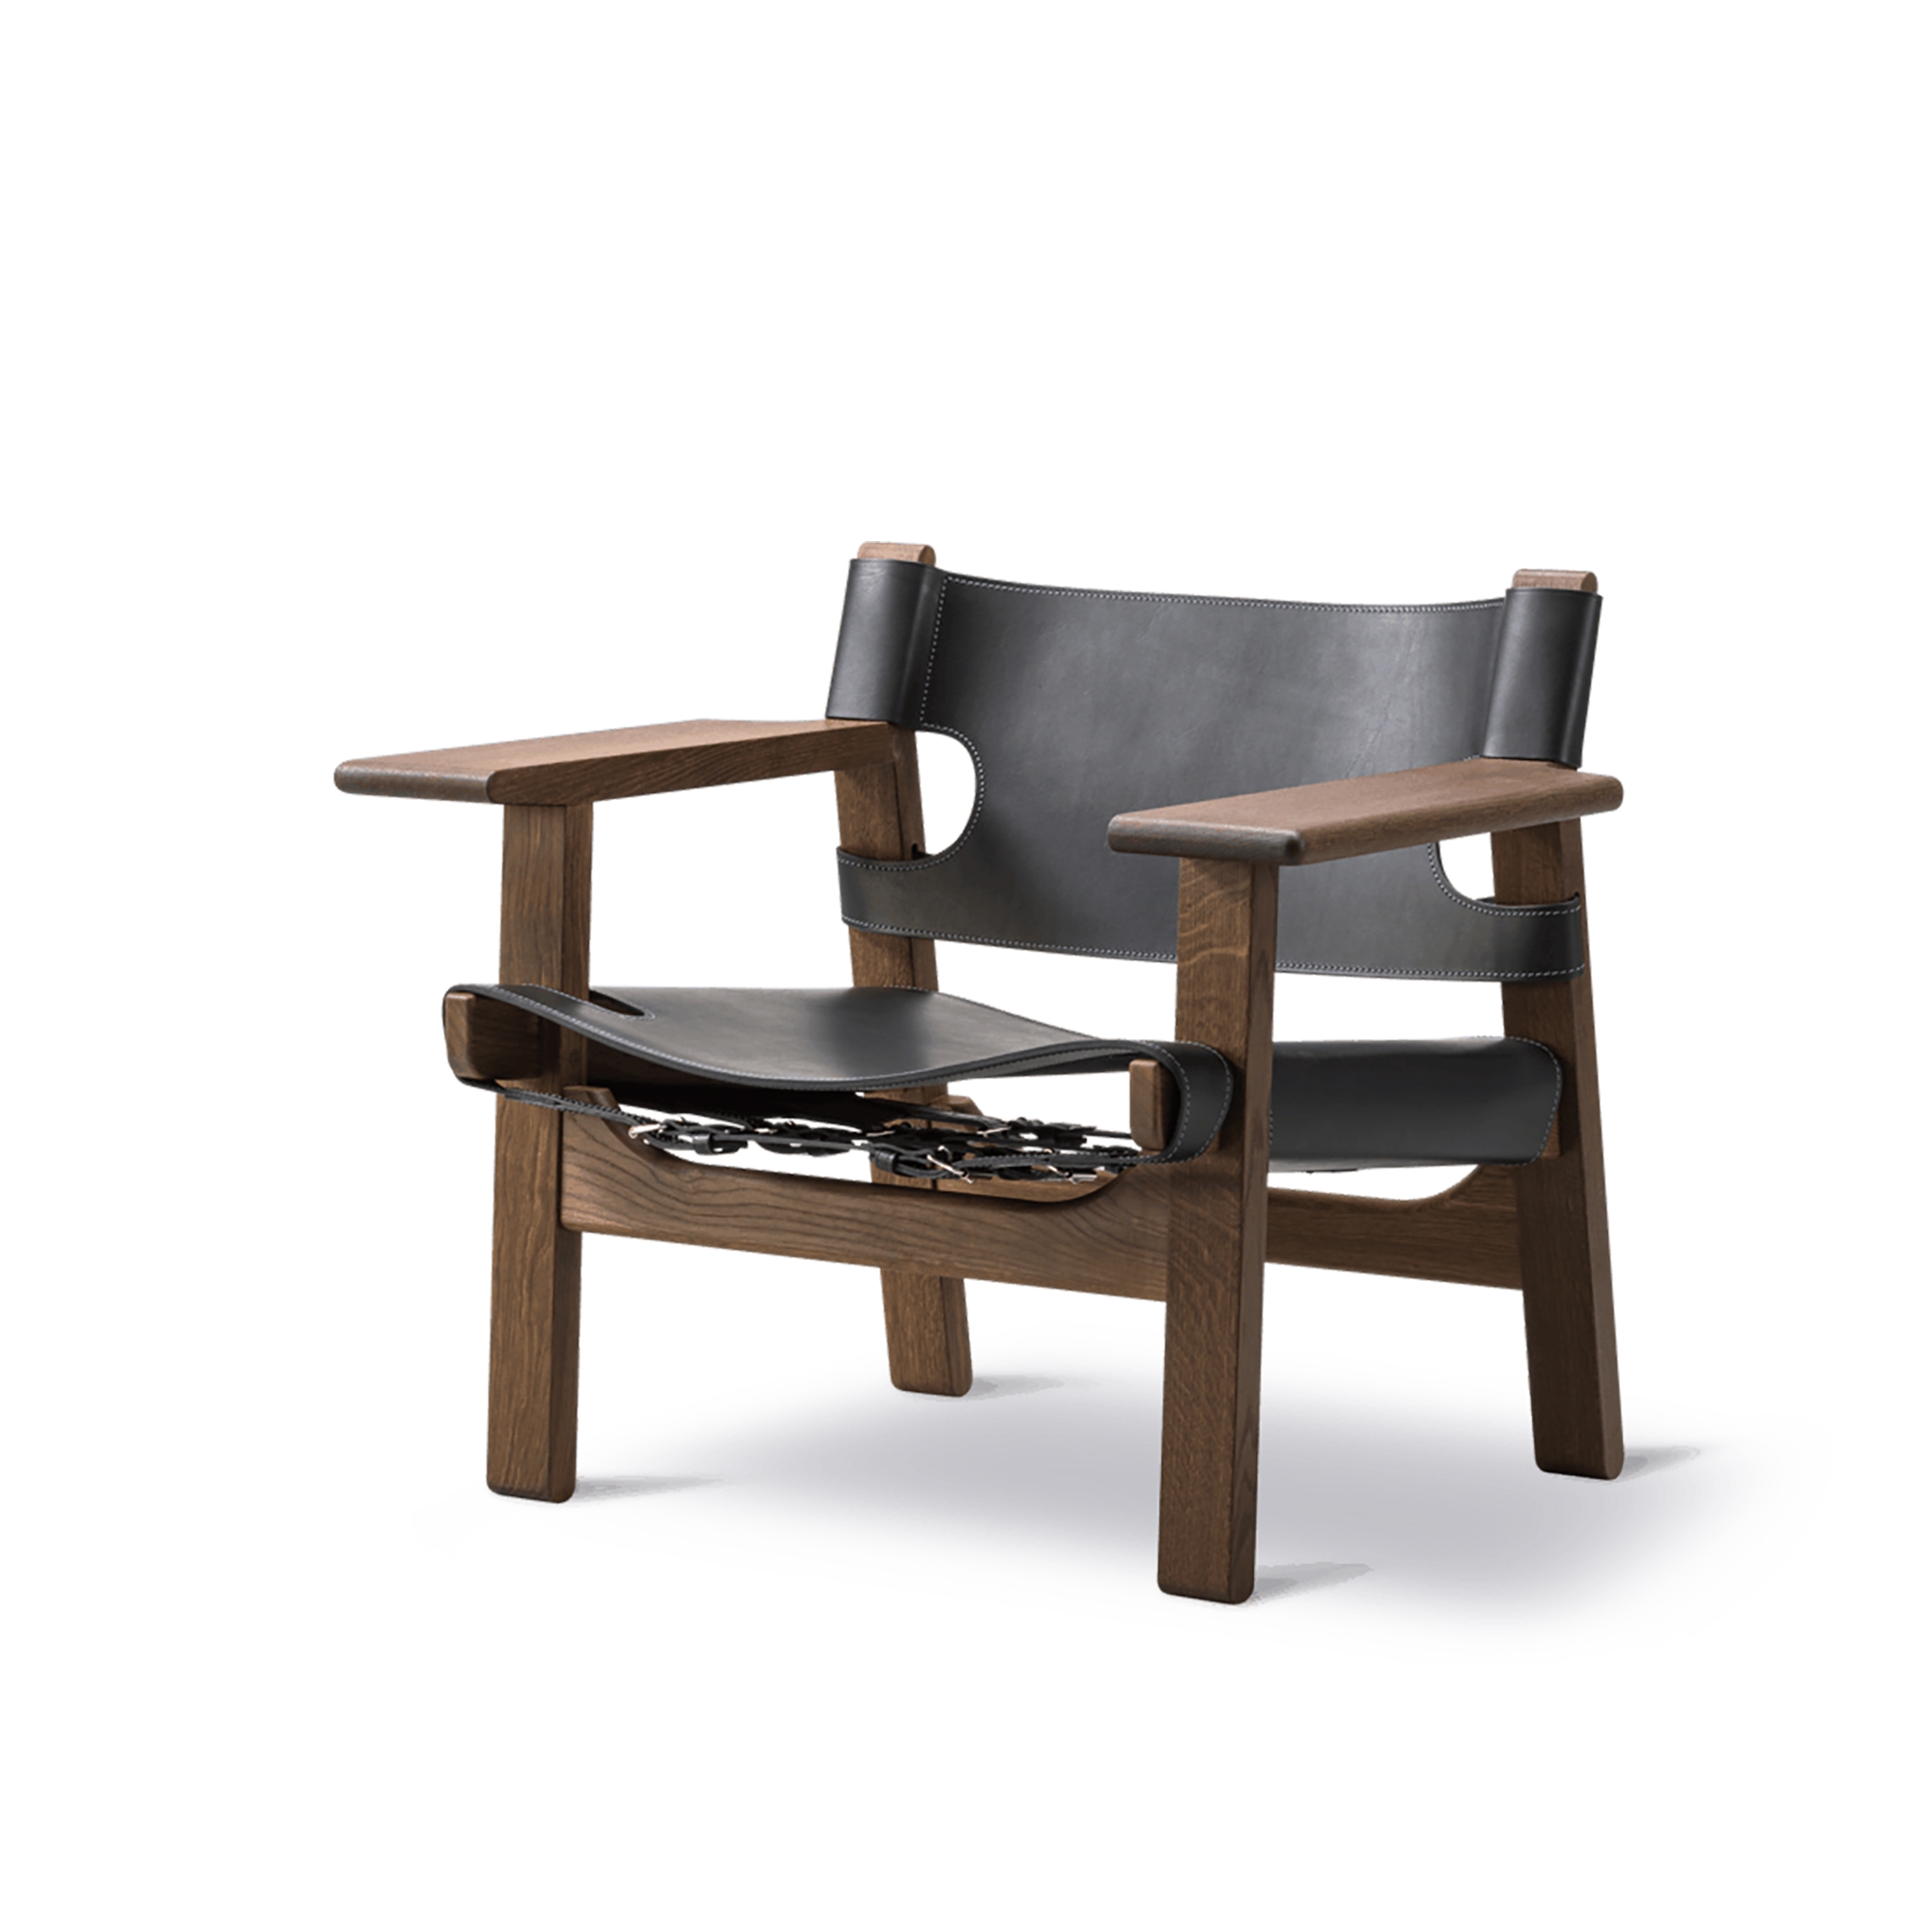 Fredericia Furniture The Spanish Chair Smoked Oiled Oak/Black Saddle Leather